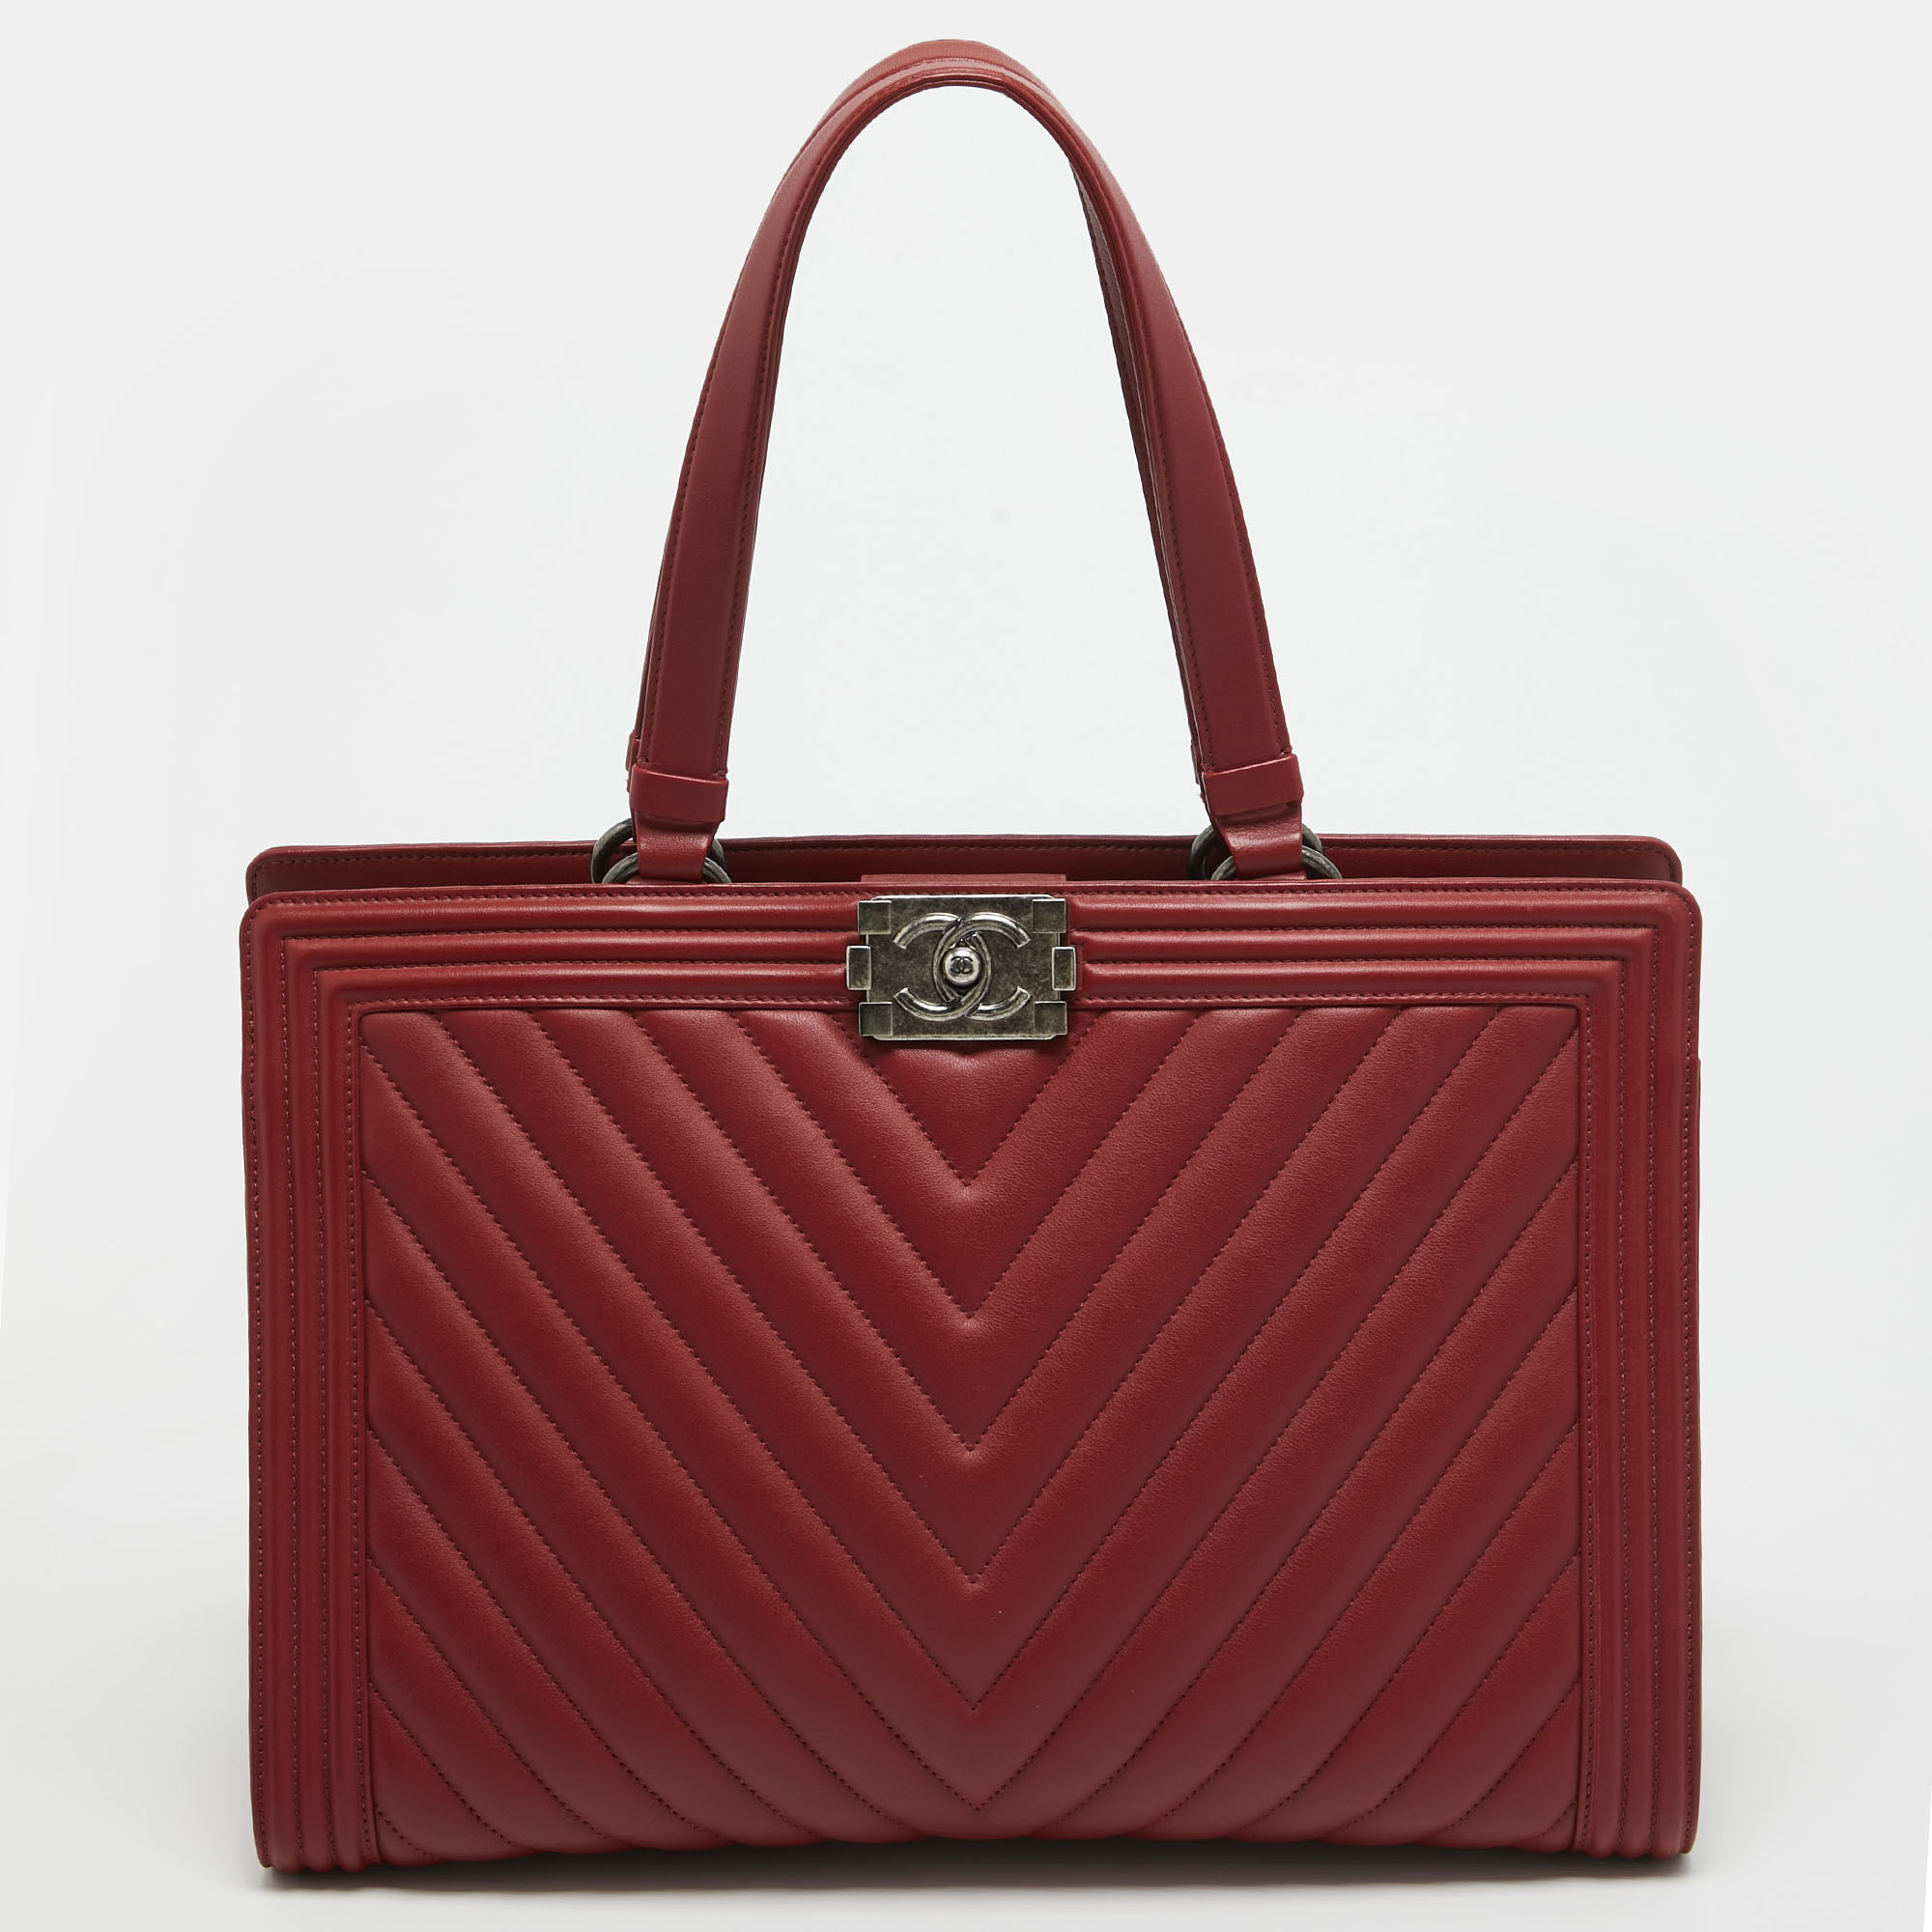 

Chanel Red Chevron Quilted Leather Large Boy Shopper Tote